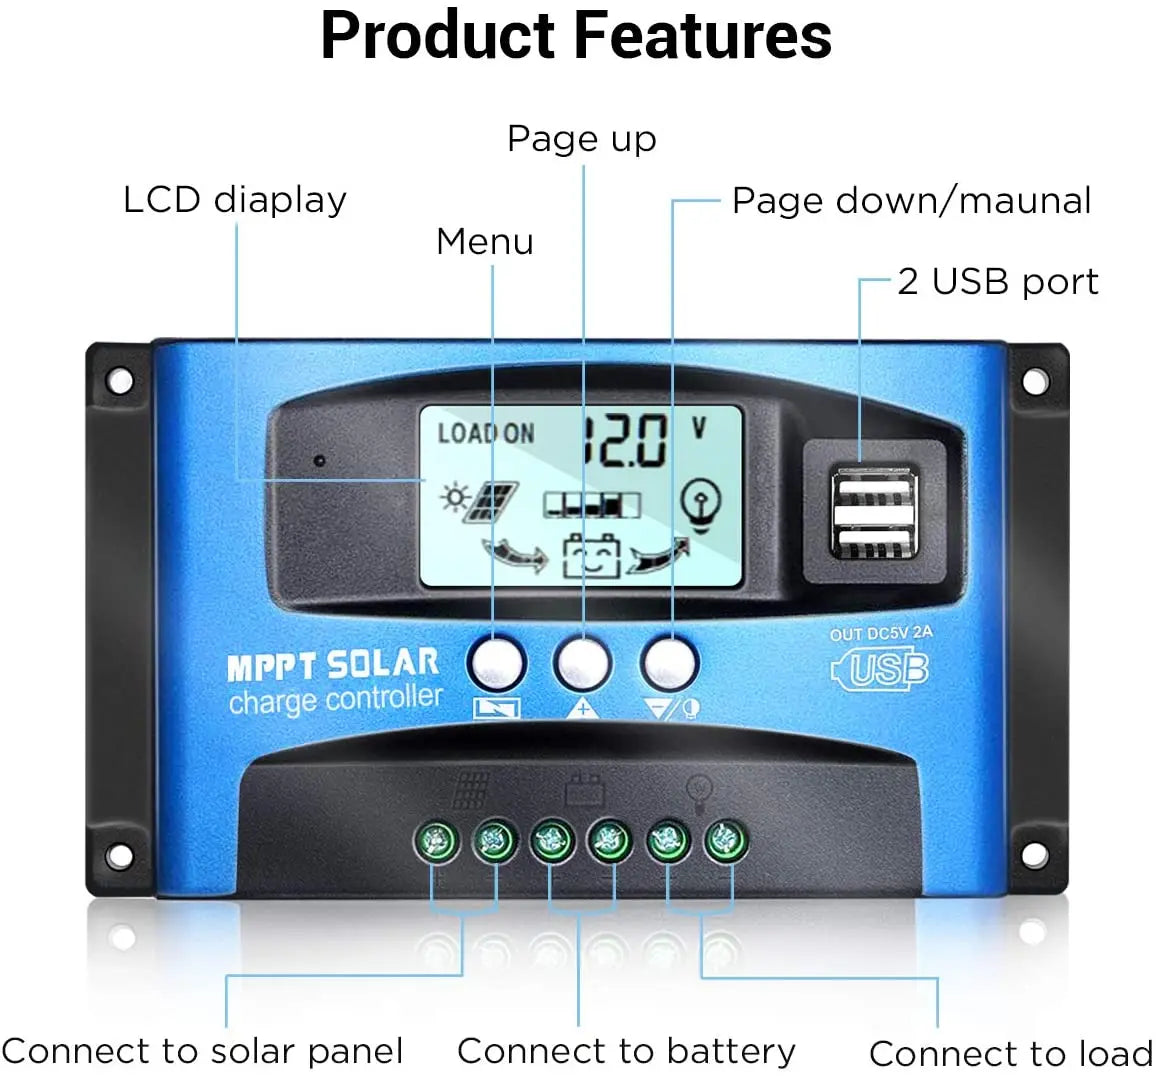 MPPT Solar Charge Controller with LCD display, manual menu, and USB ports for charging and monitoring.